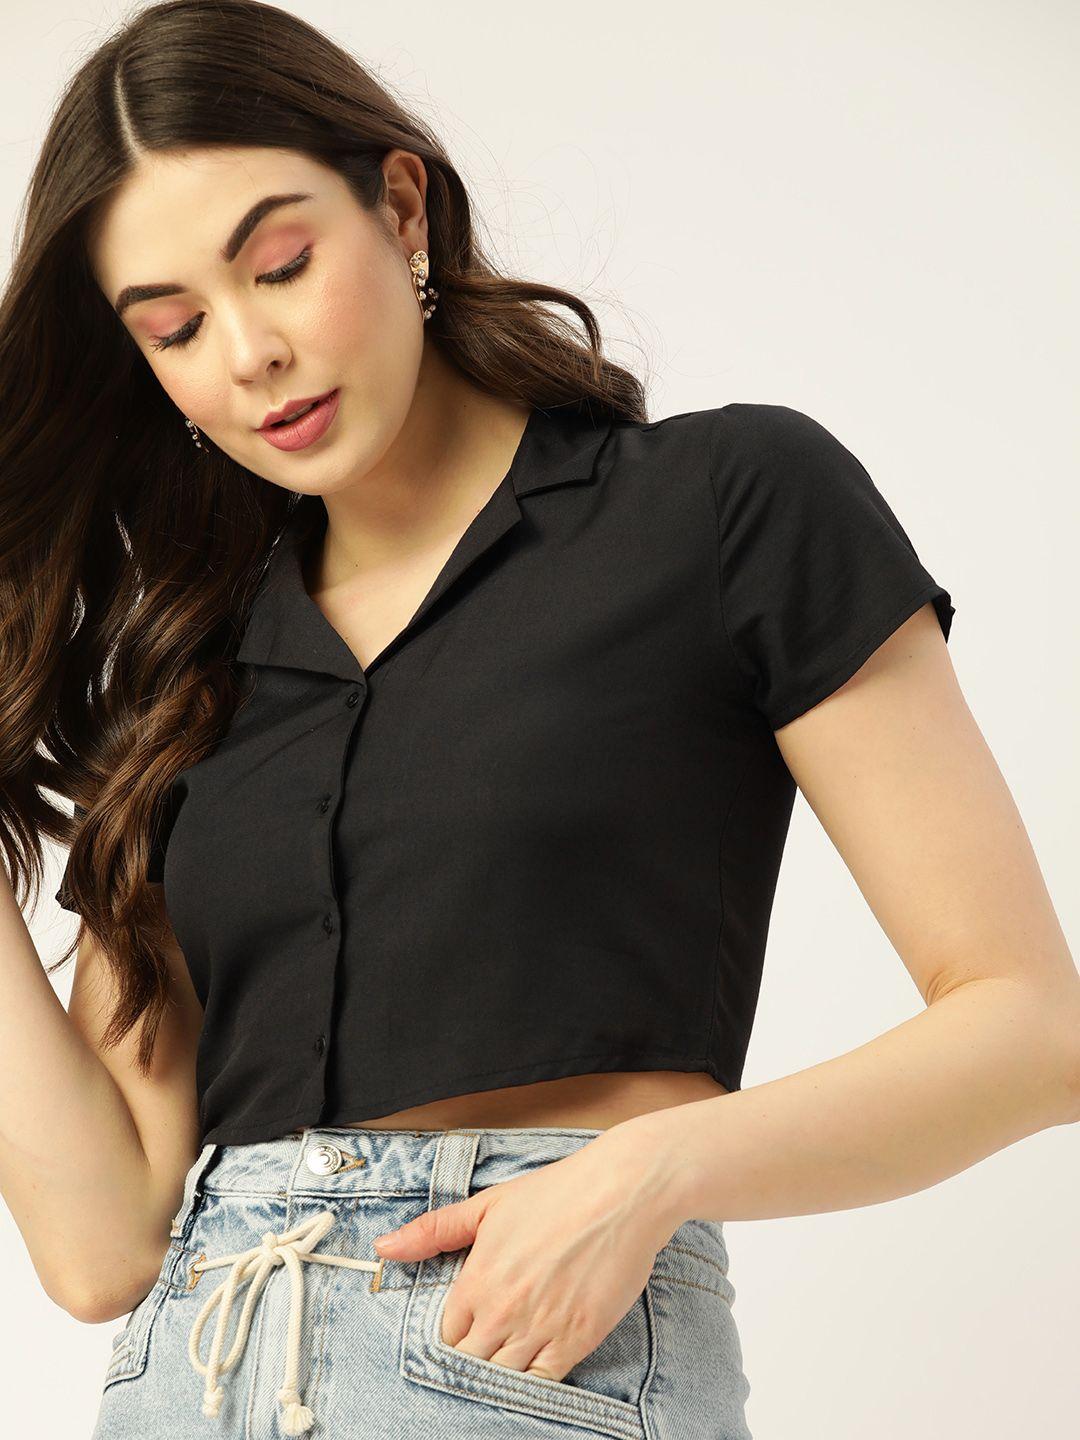 dressberry-black-solid-shirt-style-crop-top